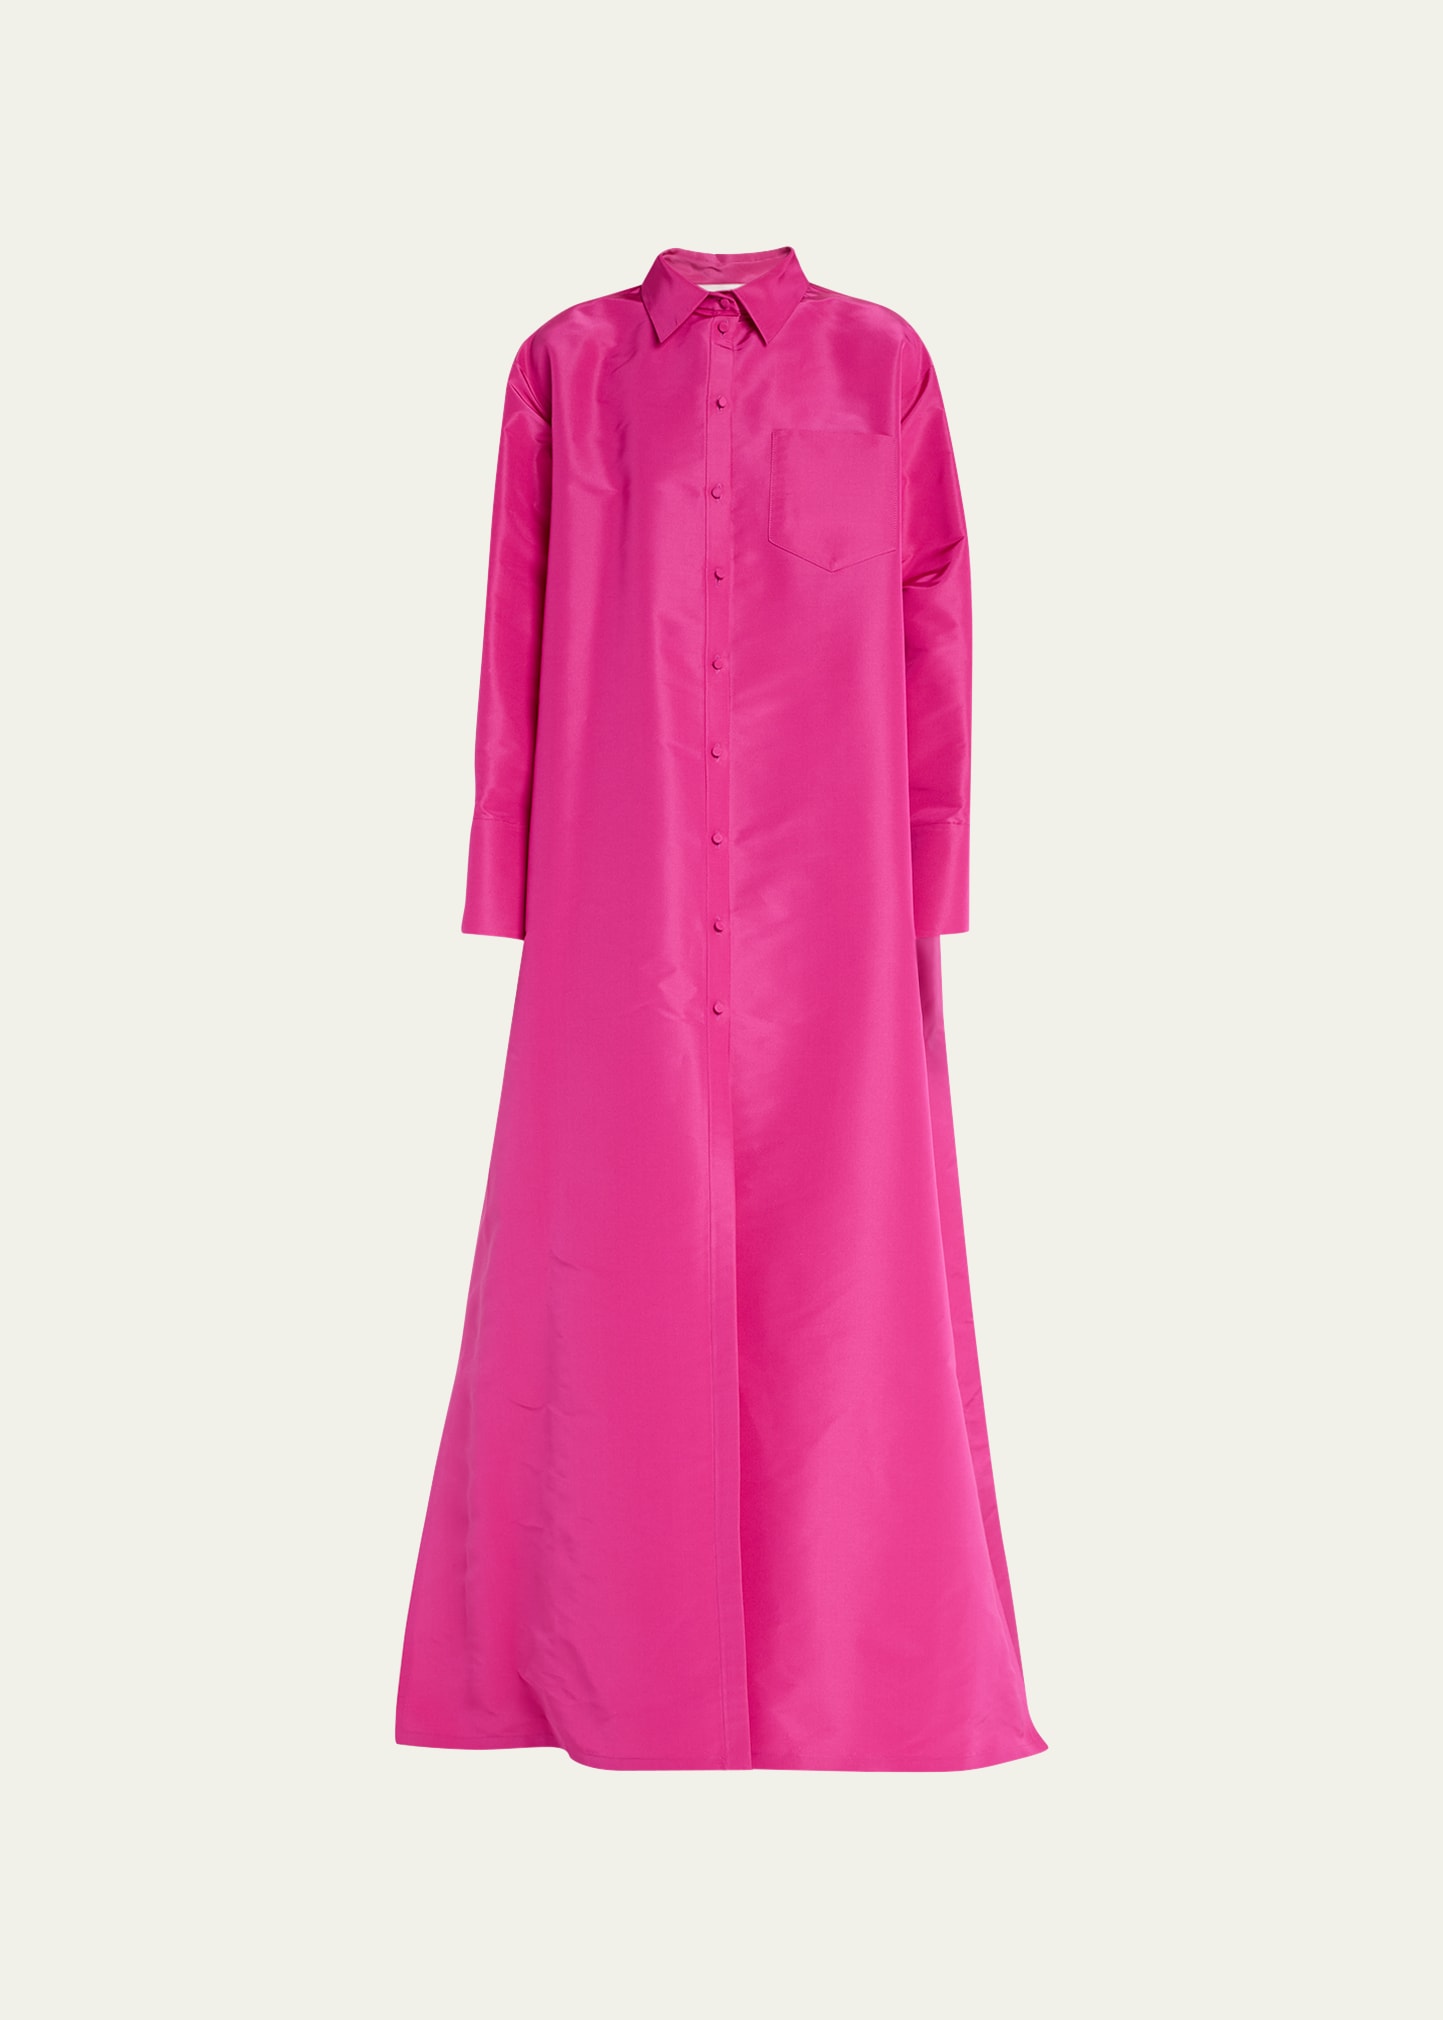 VALENTINO FAILLE OVERSIZED SHIRTDRESS GOWN